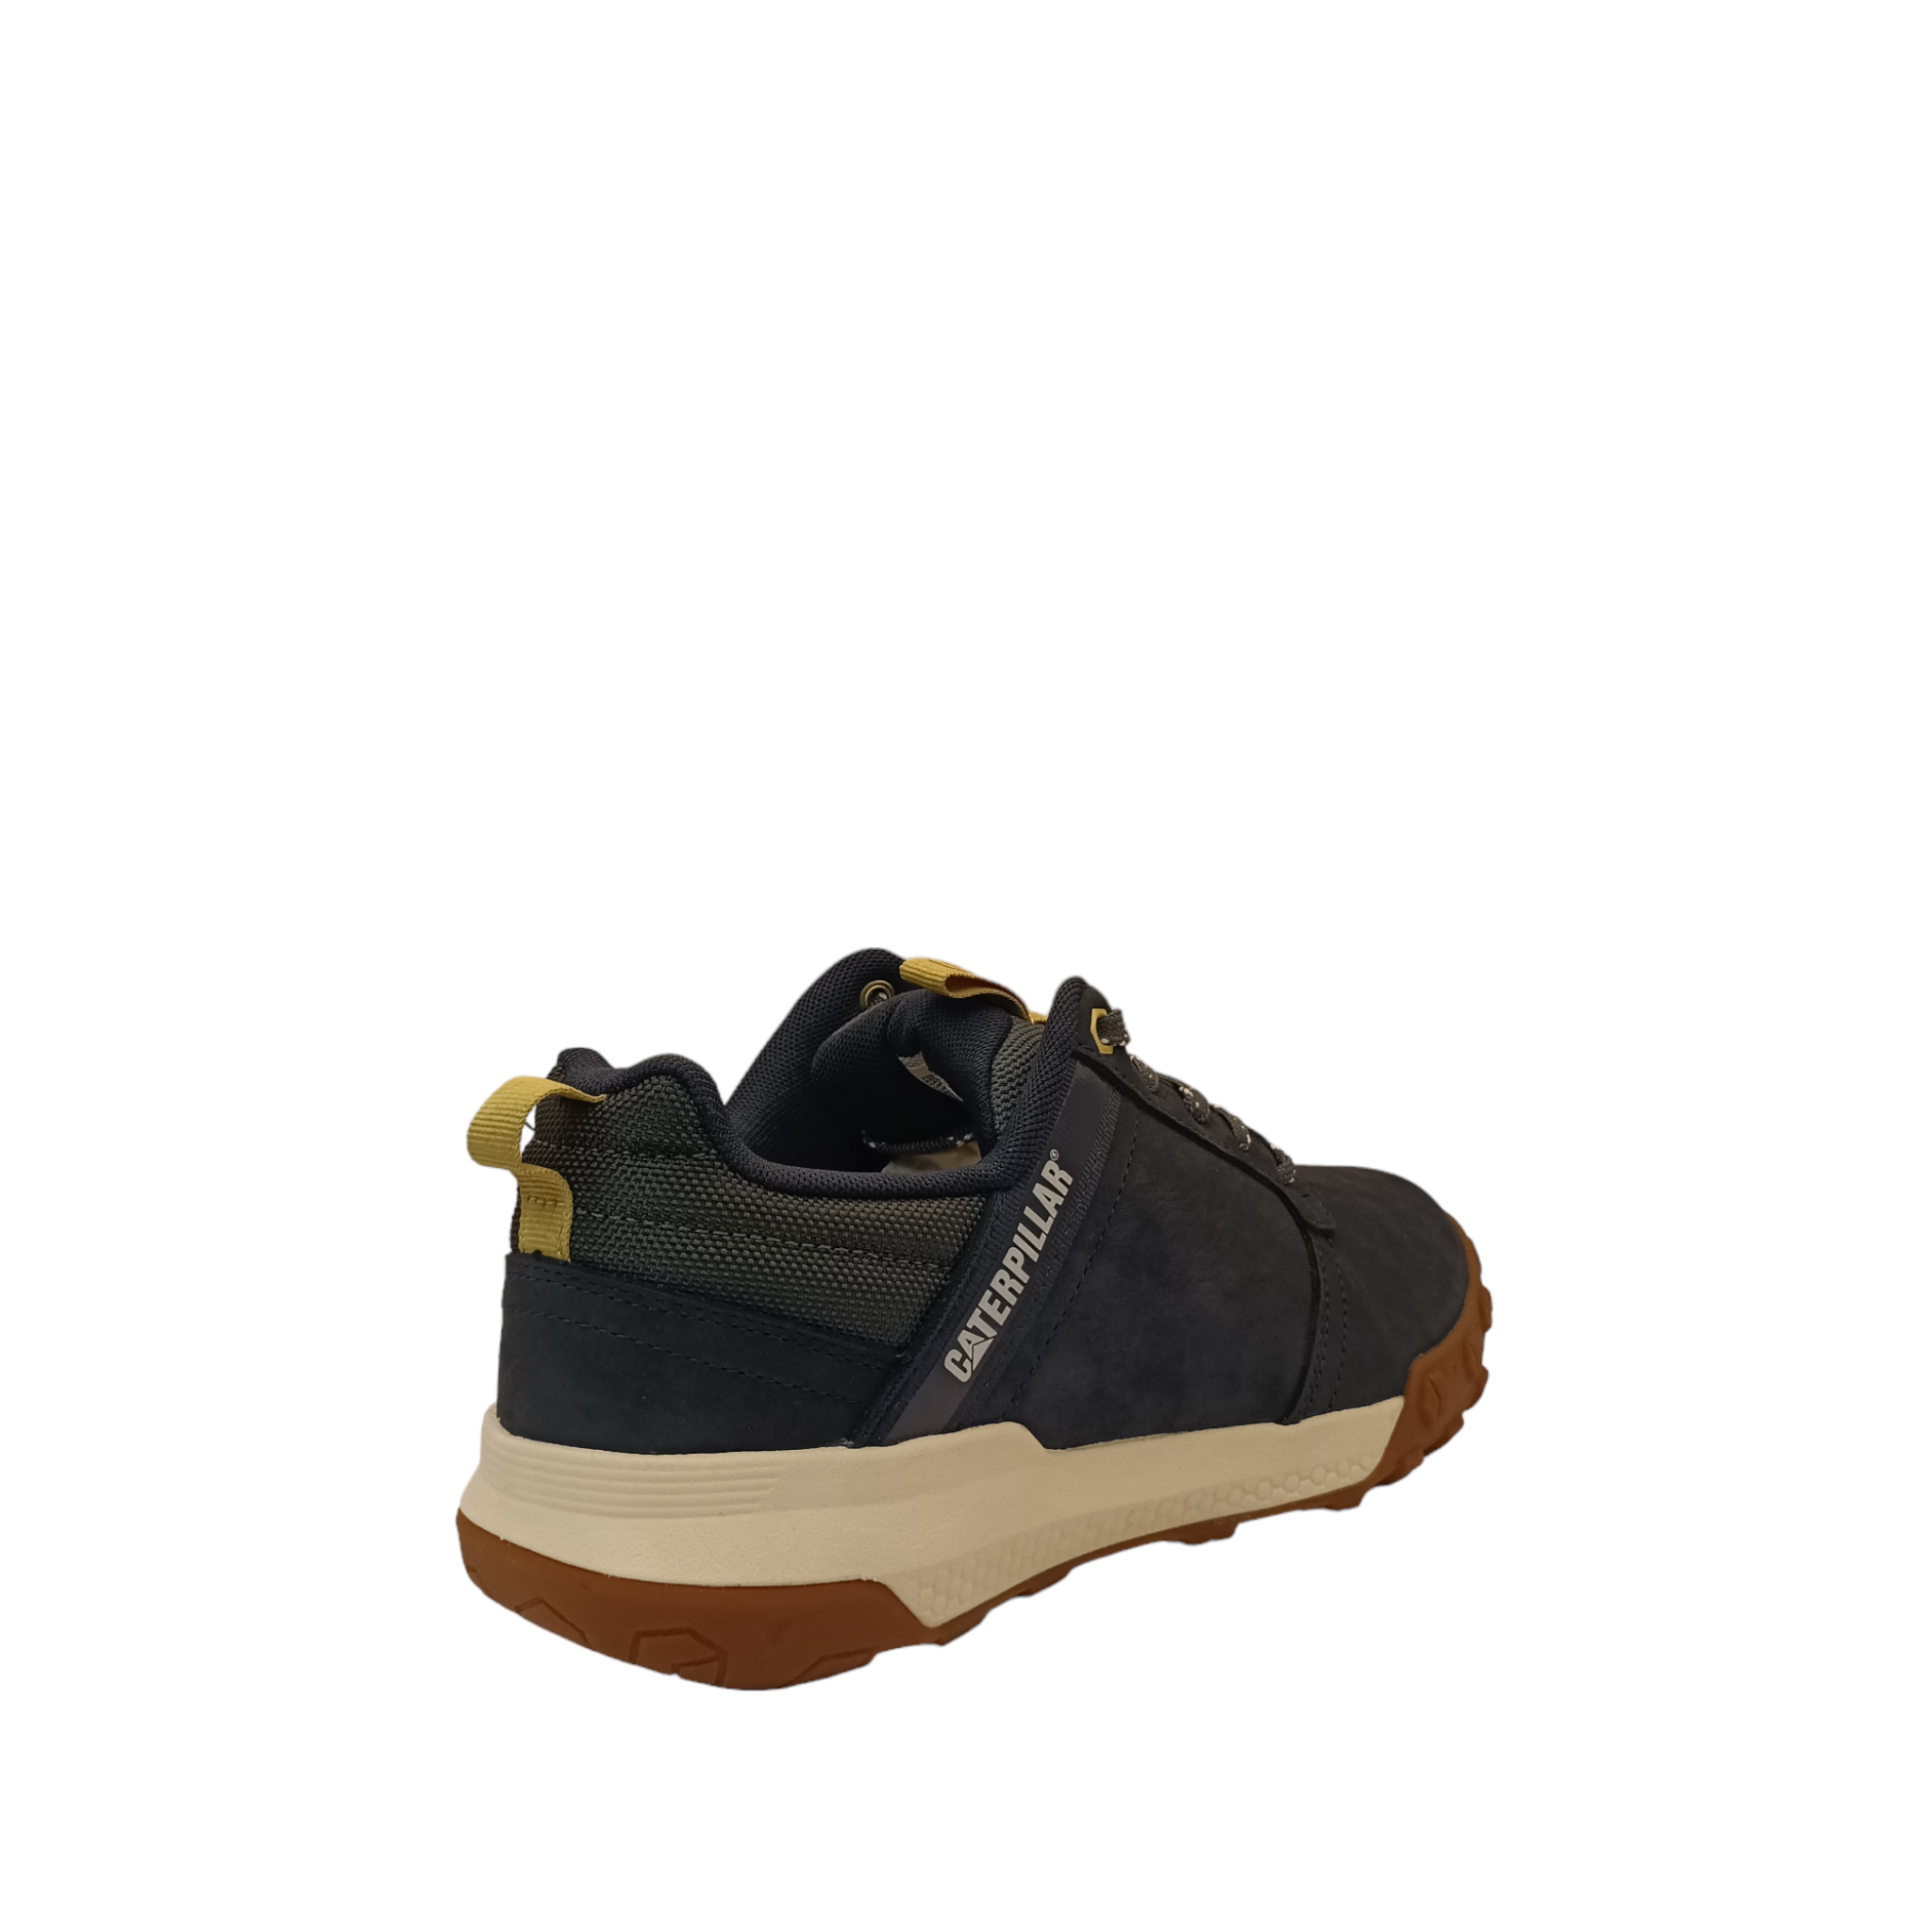 Shop Hex Cush Lo Caterpillar - with shoe&amp;me - from Caterpillar - Shoes - Mens, Sneaker, Winter - [collection]